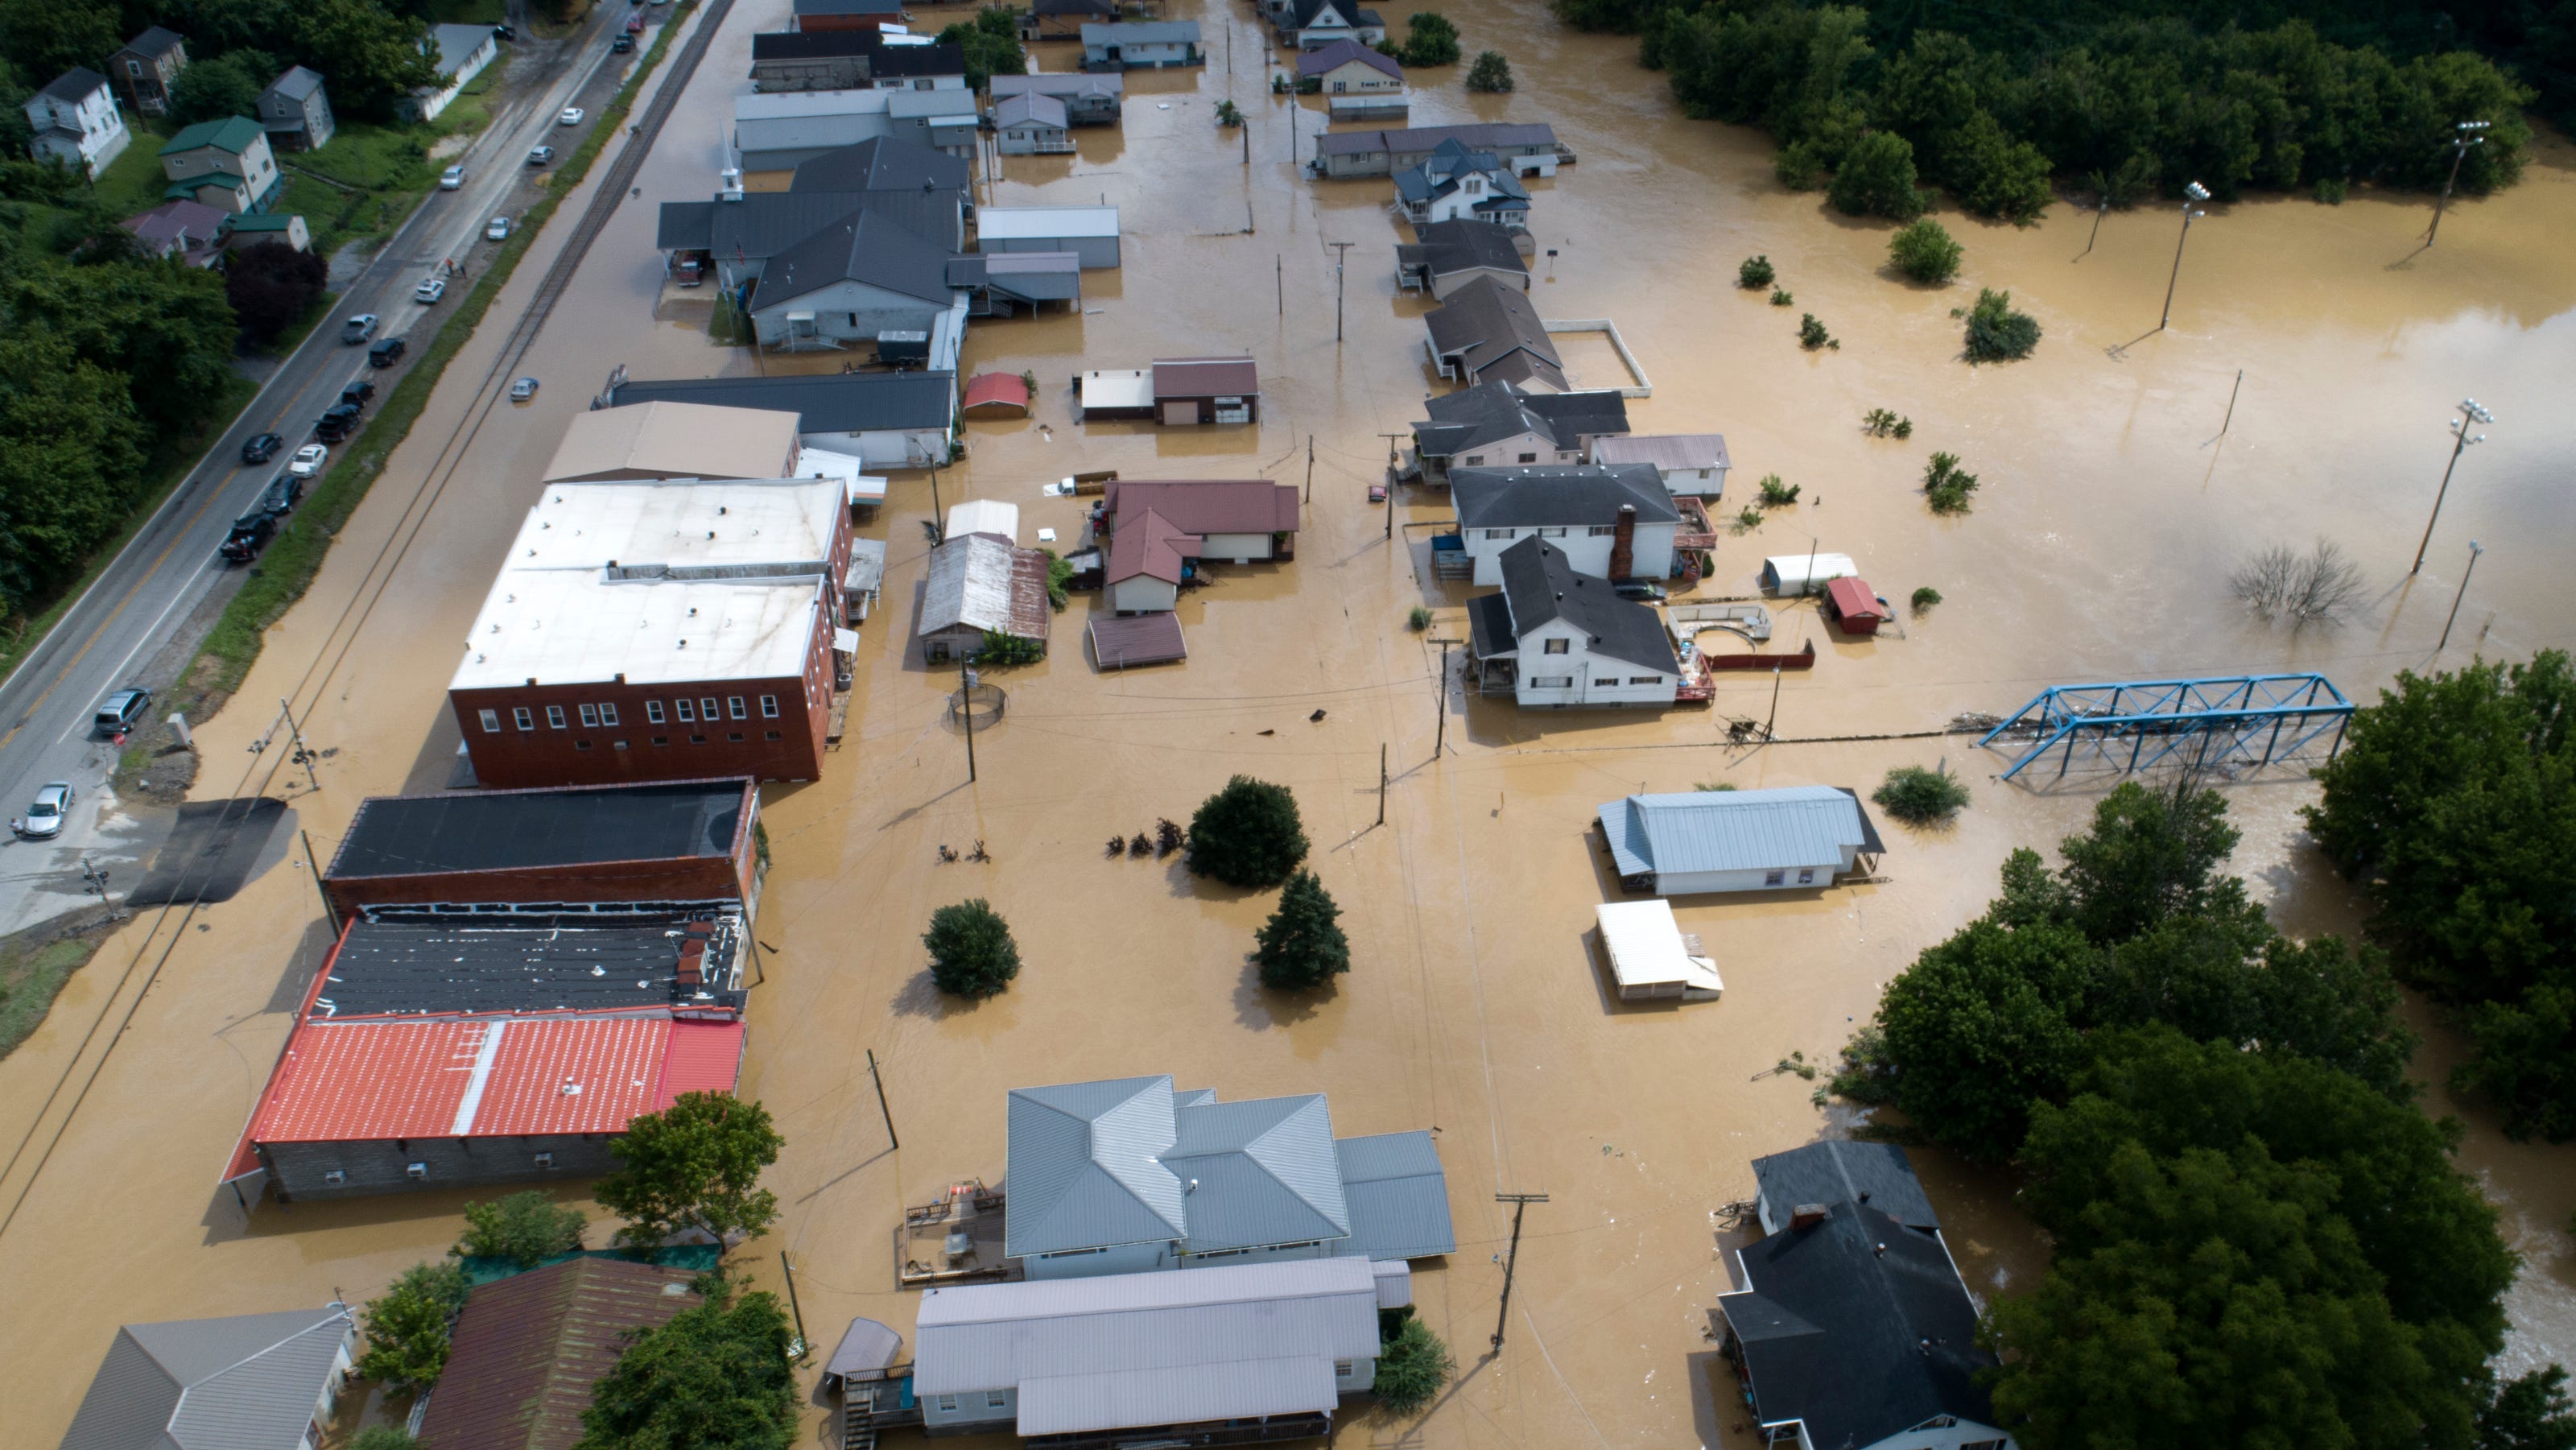 Flooding in Kentucky What to know about damage, deaths in Eastern KY